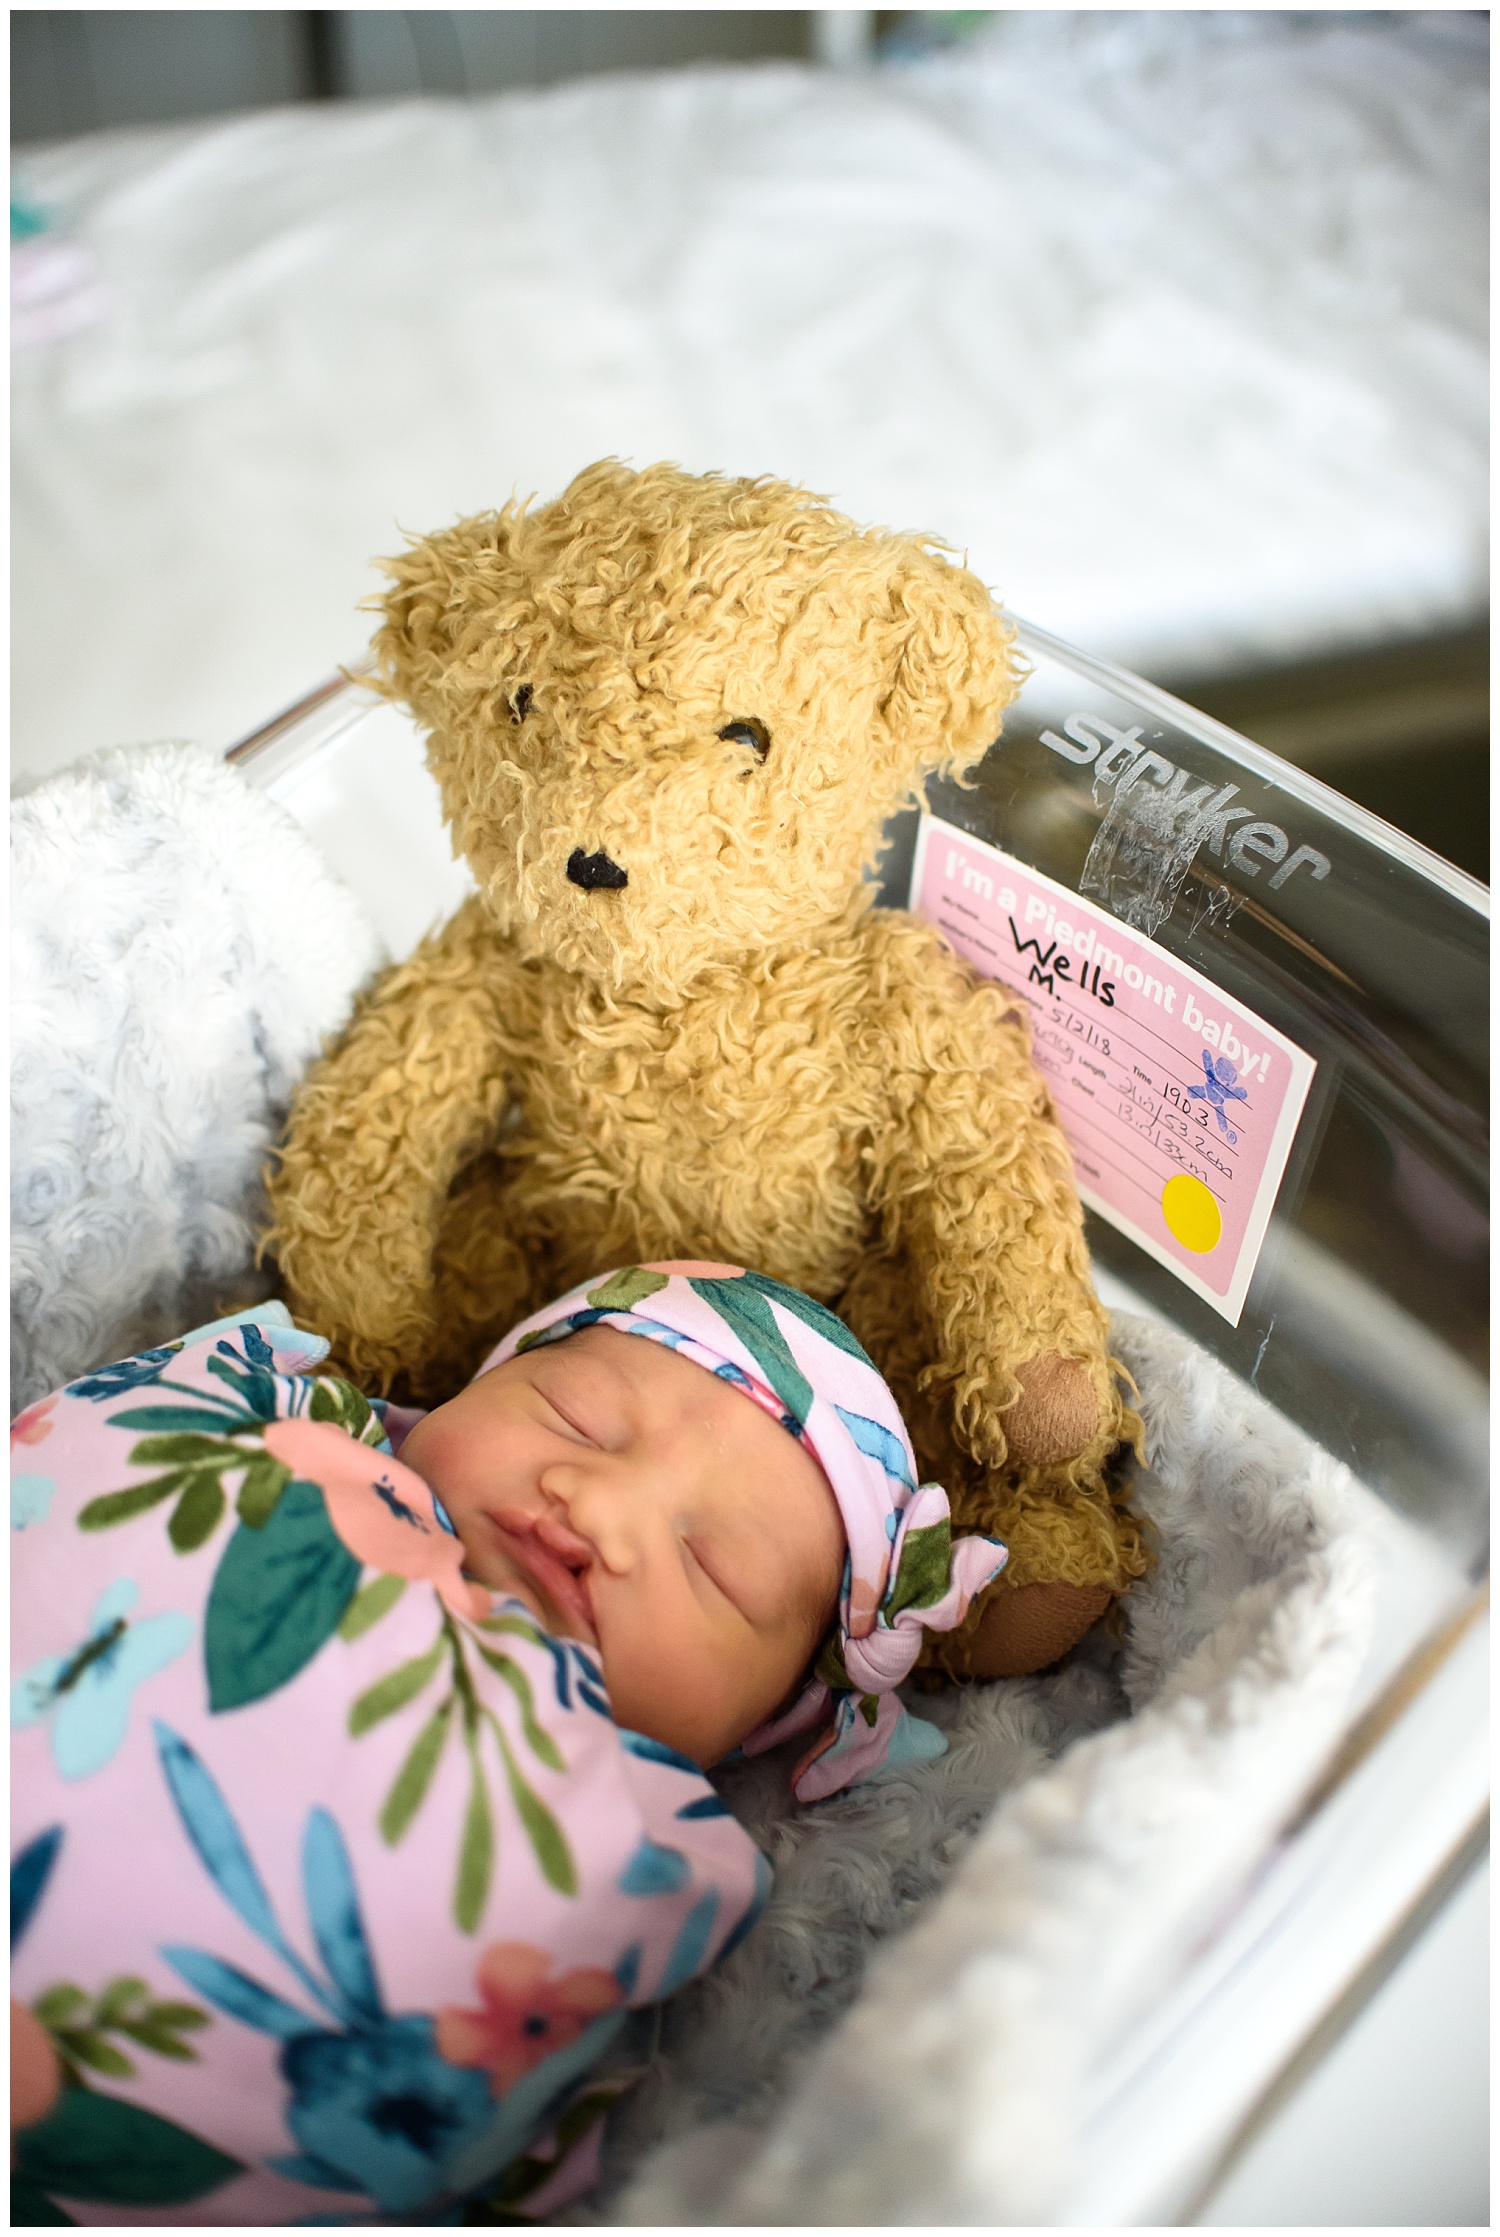 this is an image of a newborn baby girl laying in a hospital bassinet. she is sleeping and there is a family teddy bear next to her in the bassinet.